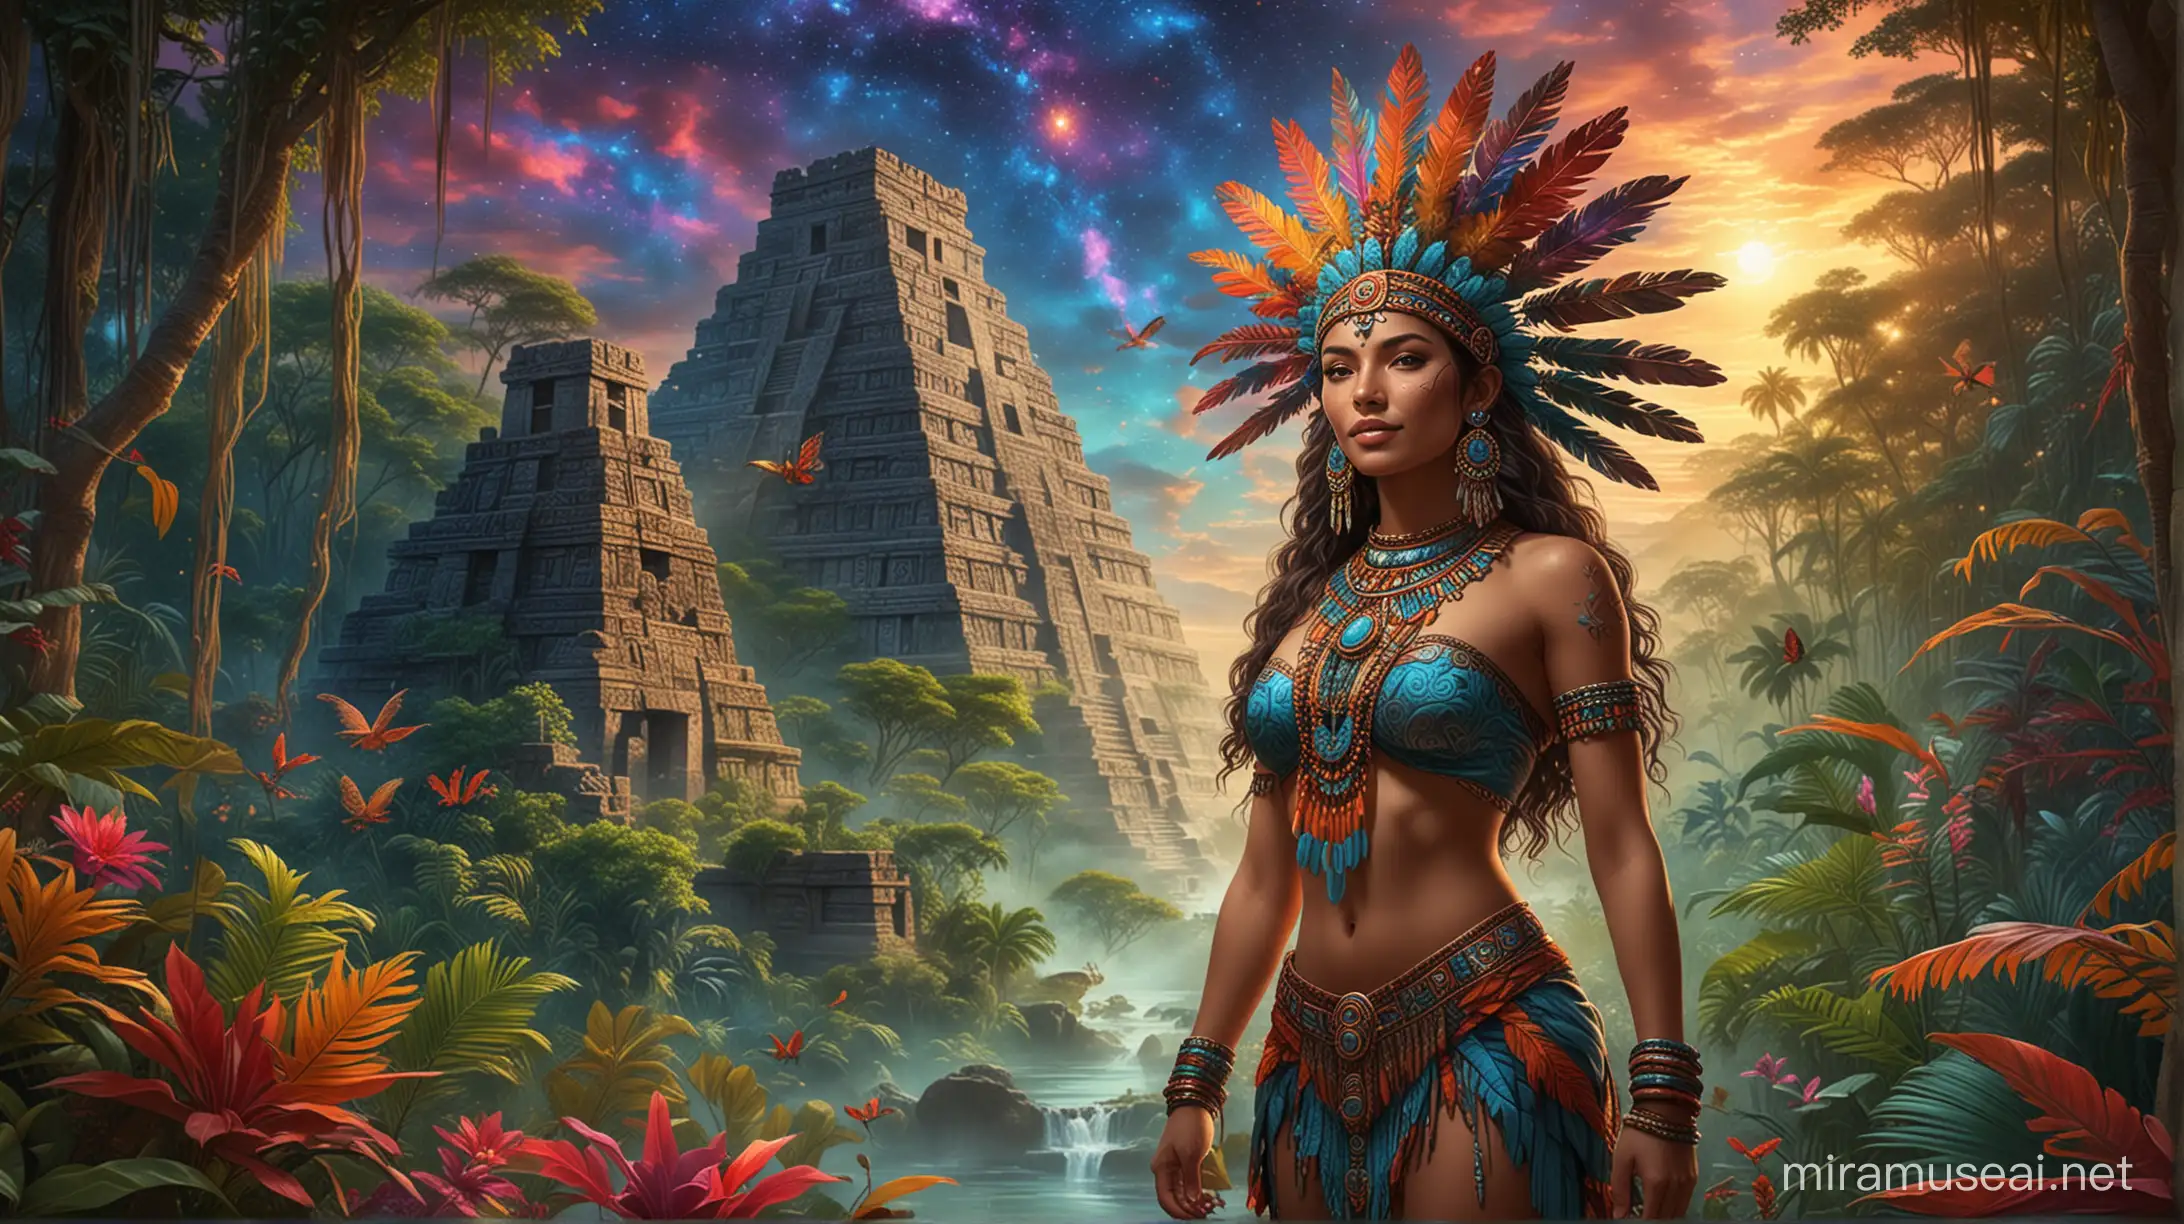 standing tall mexican aztec Goddess Emerges From A Jungle Oasis, with radiant glowing skin, a Beautiful Fantasy Landscape, Cosmic Sky, jungle animals in the backdrop,  vibrant colors, with inviting smile